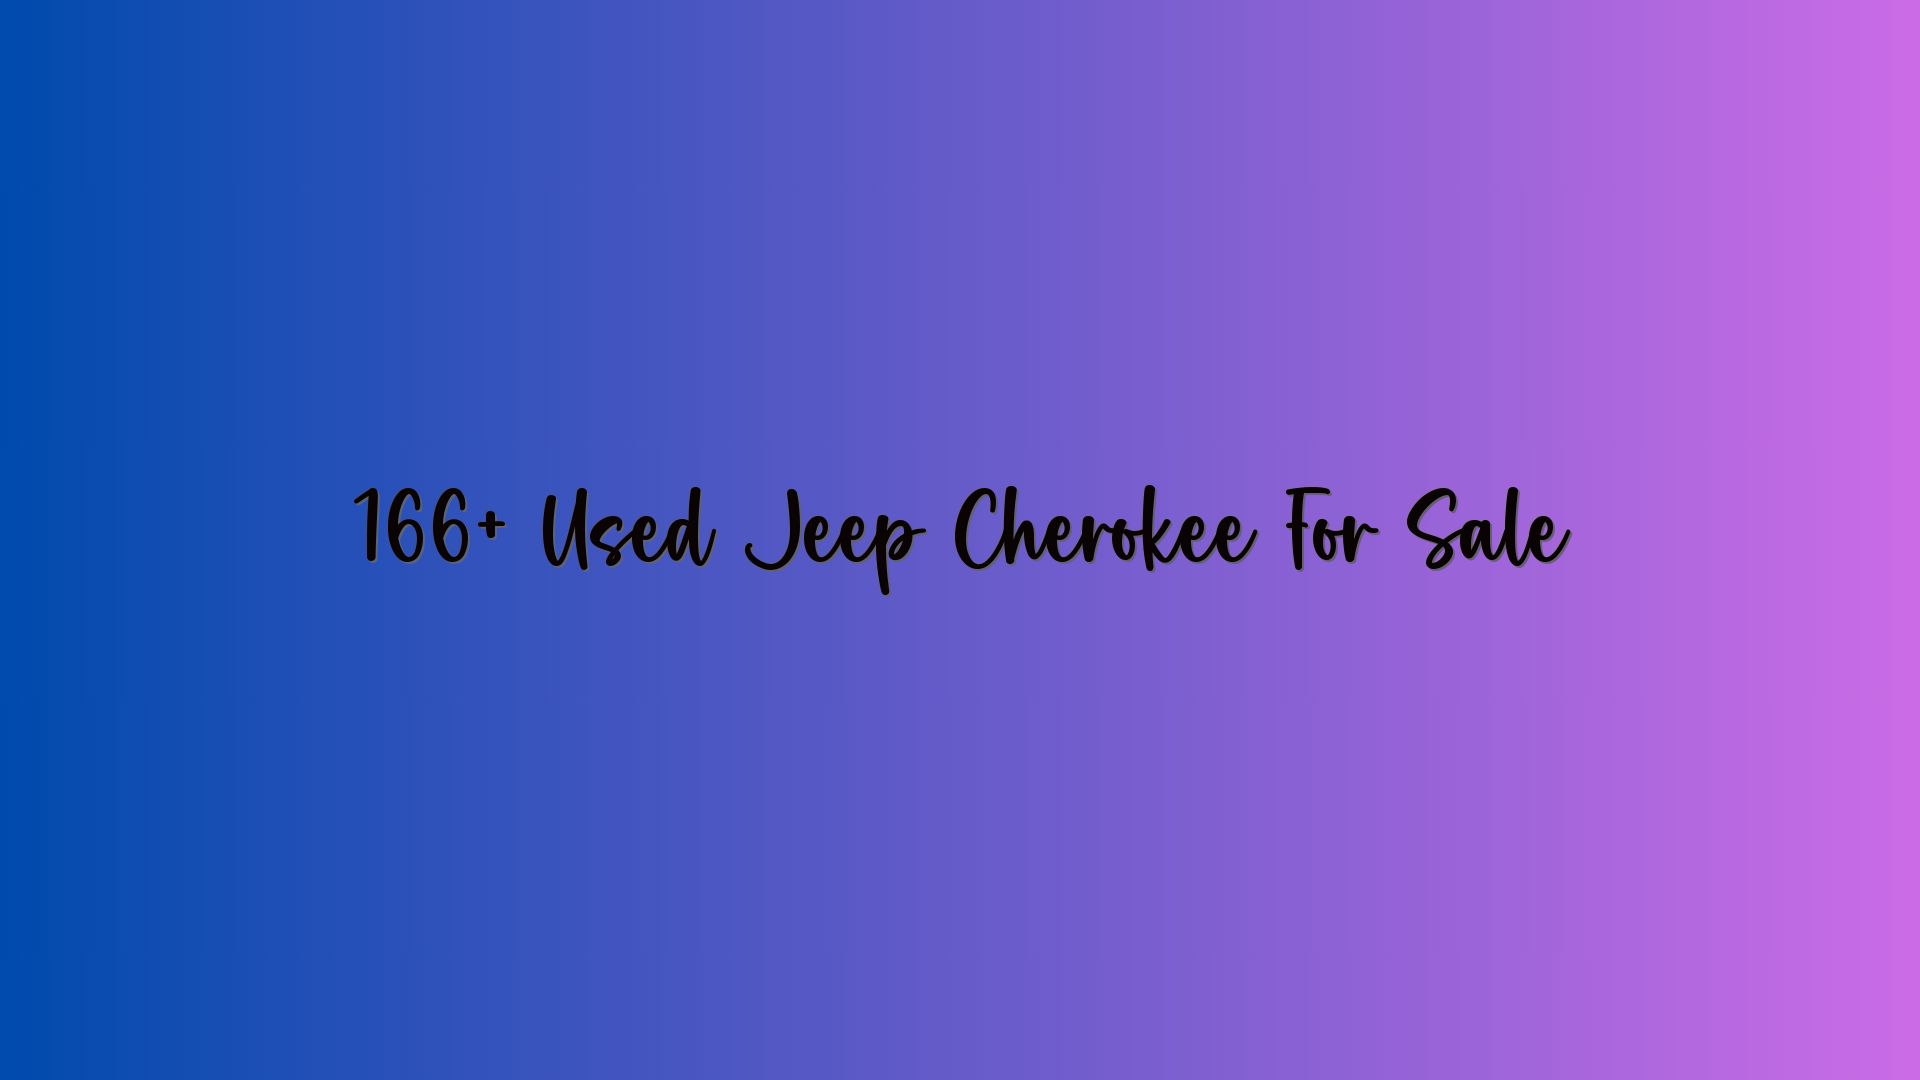 166+ Used Jeep Cherokee For Sale